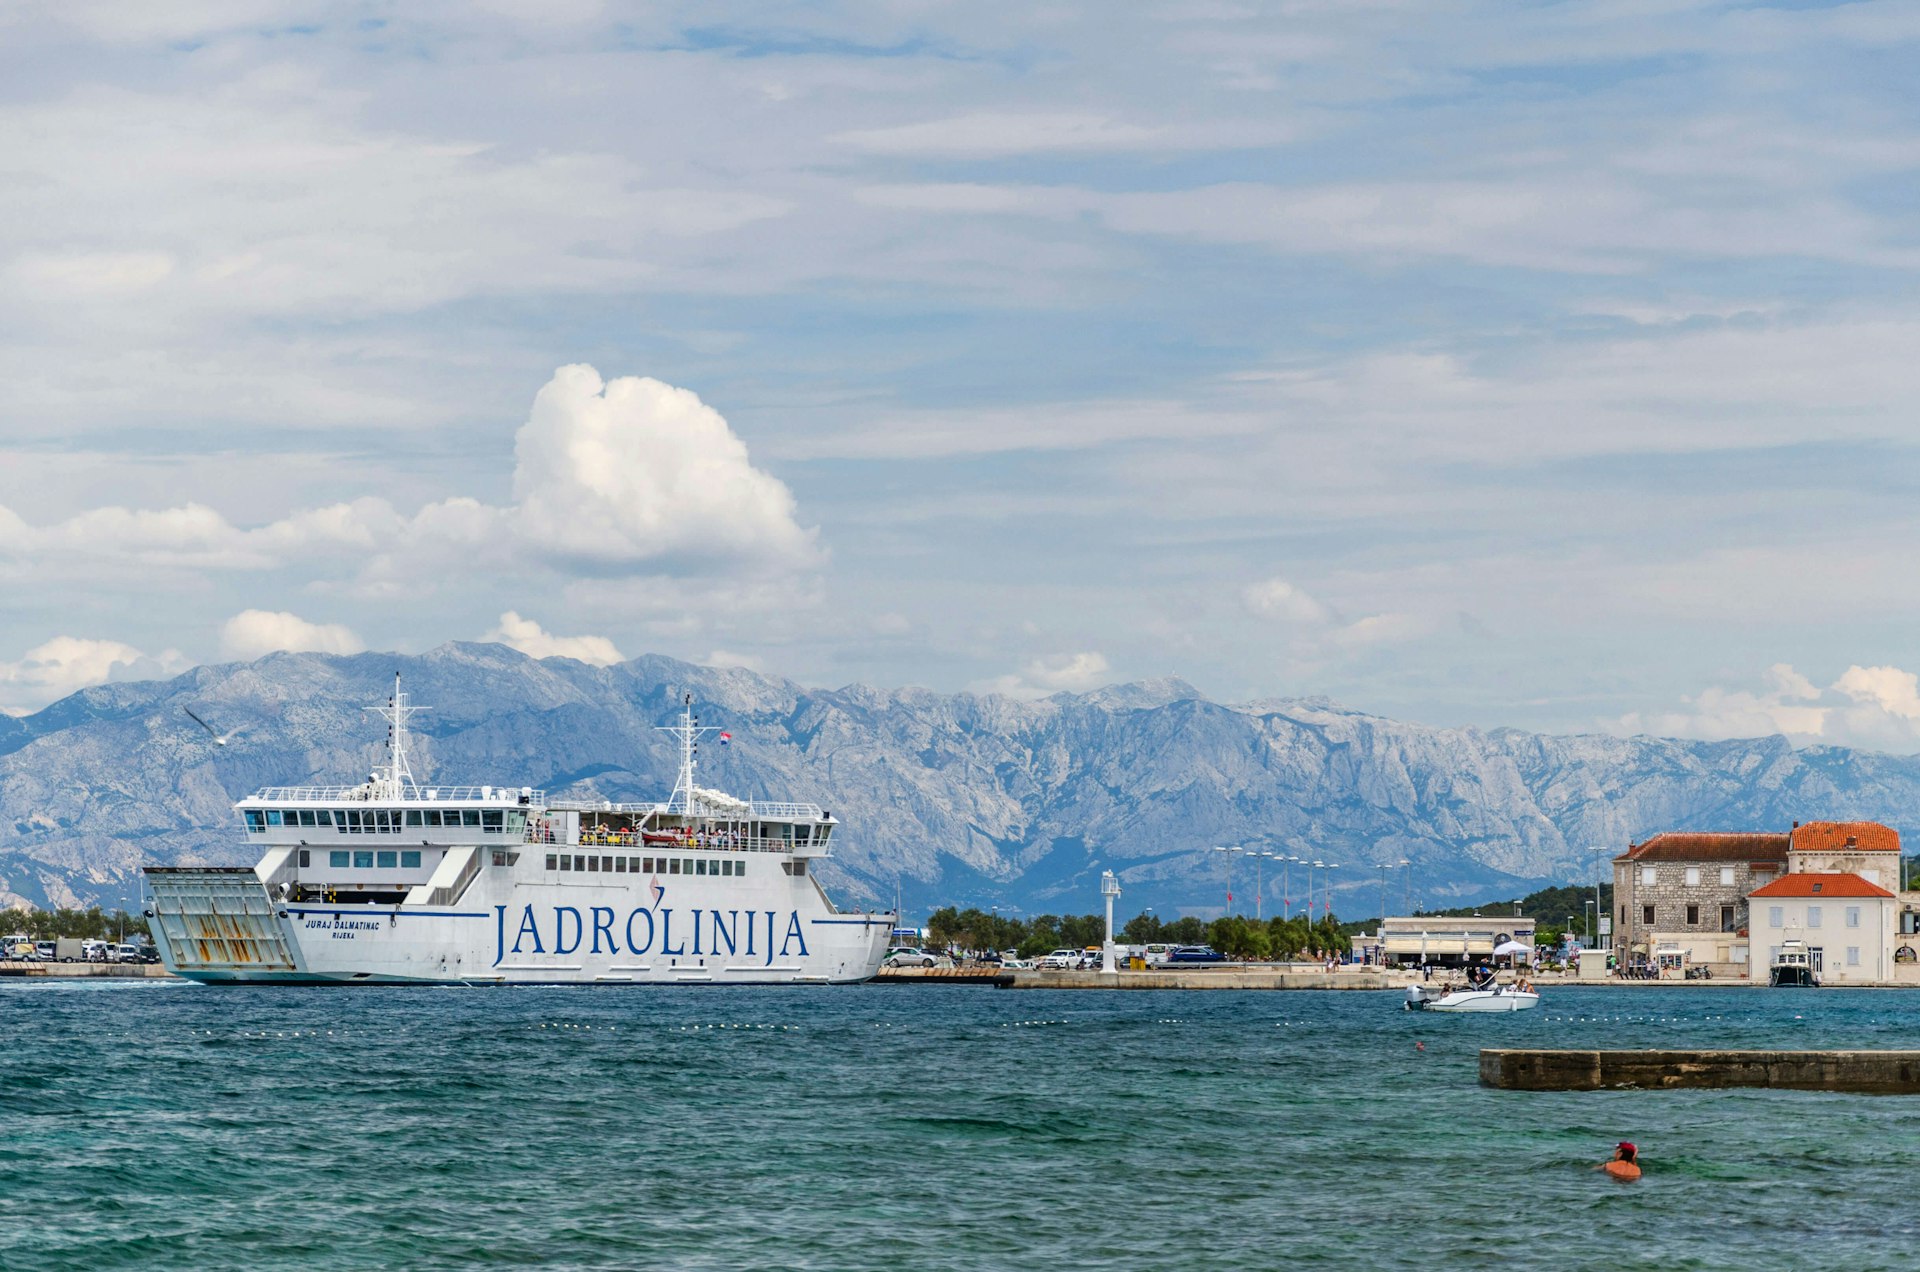 Picturesque view of Jadrolinija ferry against a mountain backdrop on a sunny day